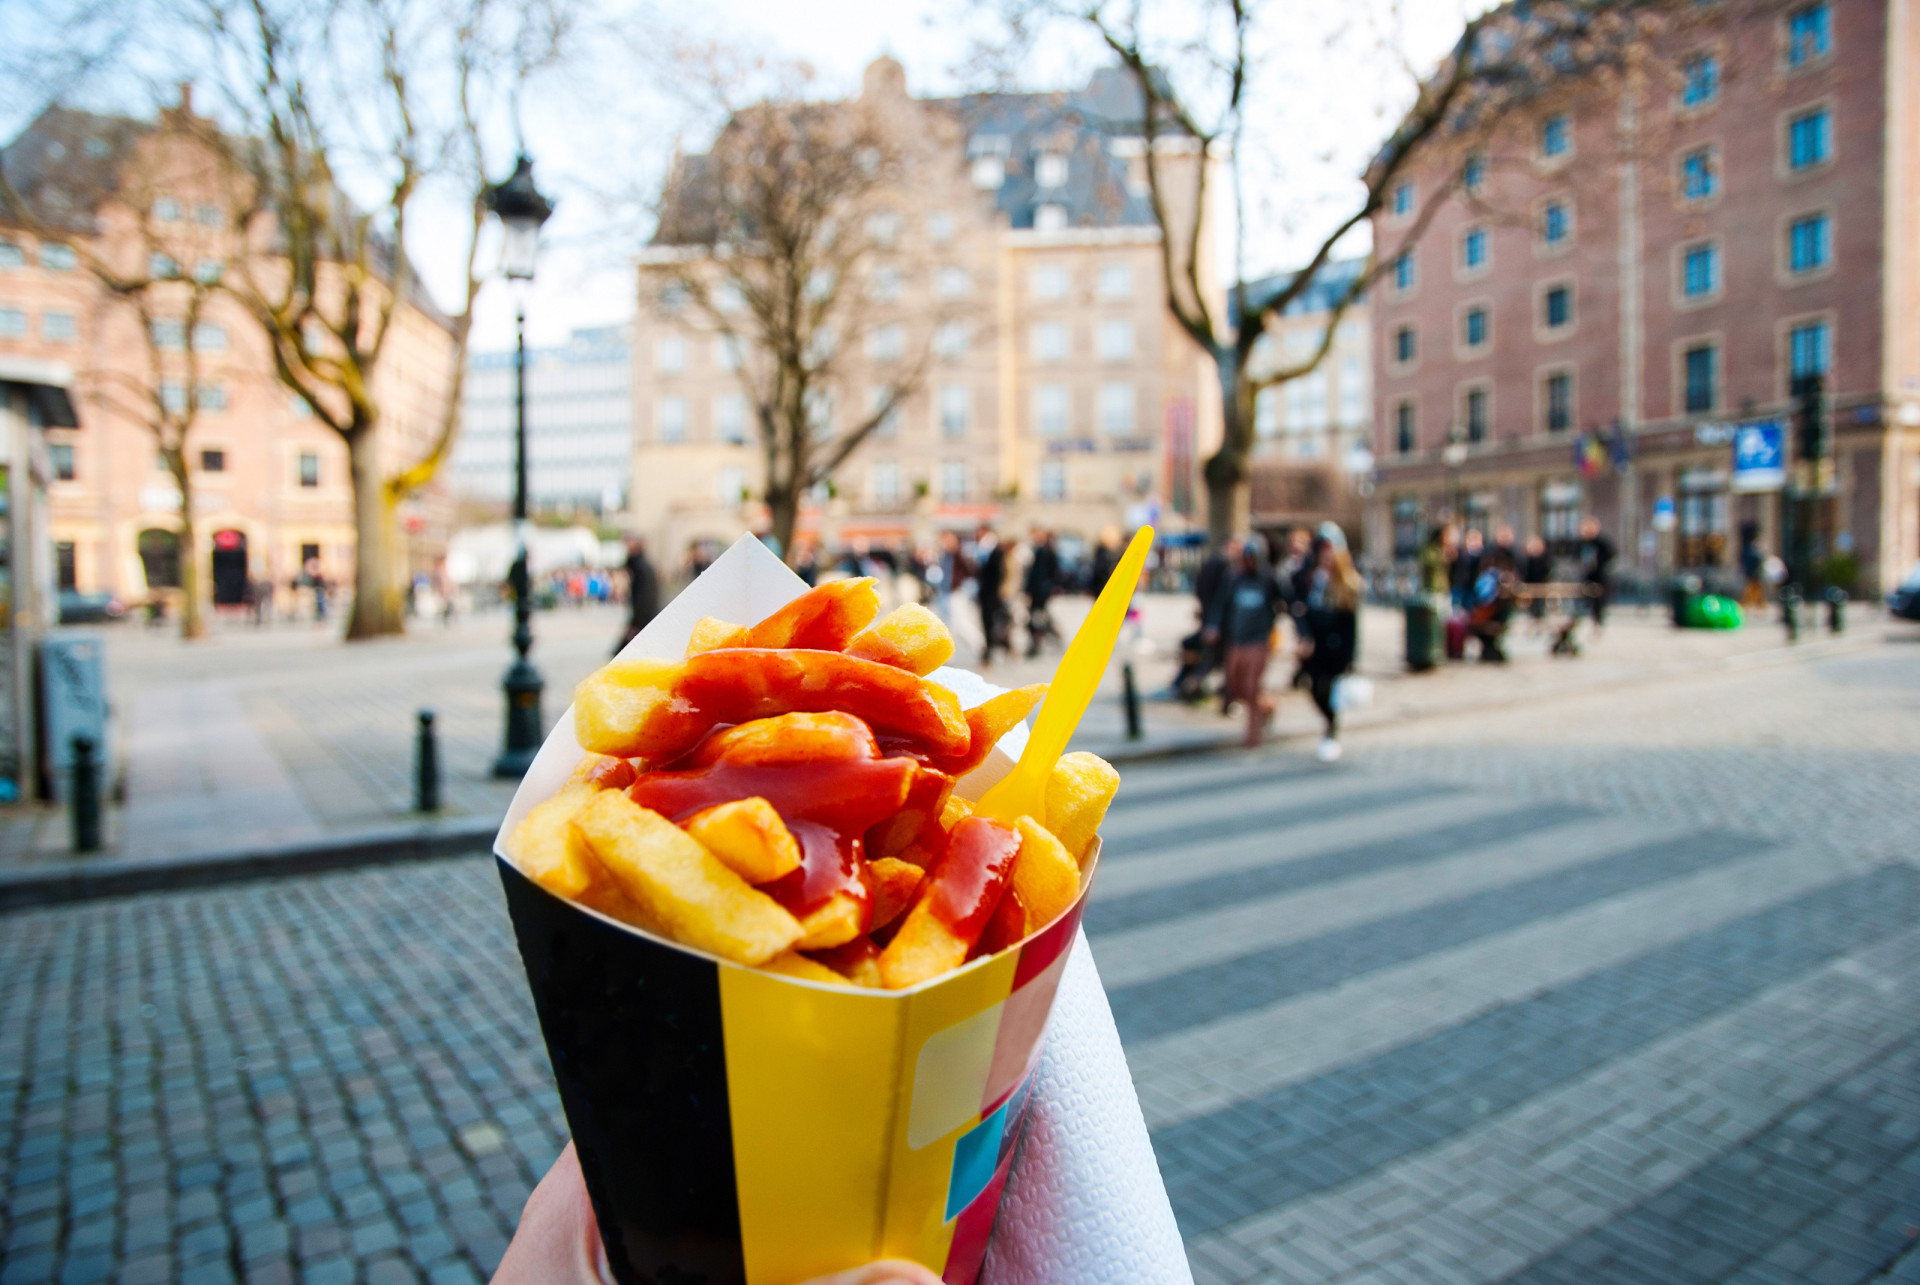 As you may know by now, French fries weren't actually created in France, but in Belgium instead. So where else are you going to find the best fries?<p><a href="https://www.msn.com/en-us/community/channel/vid-7xx8mnucu55yw63we9va2gwr7uihbxwc68fxqp25x6tg4ftibpra?cvid=94631541bc0f4f89bfd59158d696ad7e">Follow us and access great exclusive content every day</a></p>